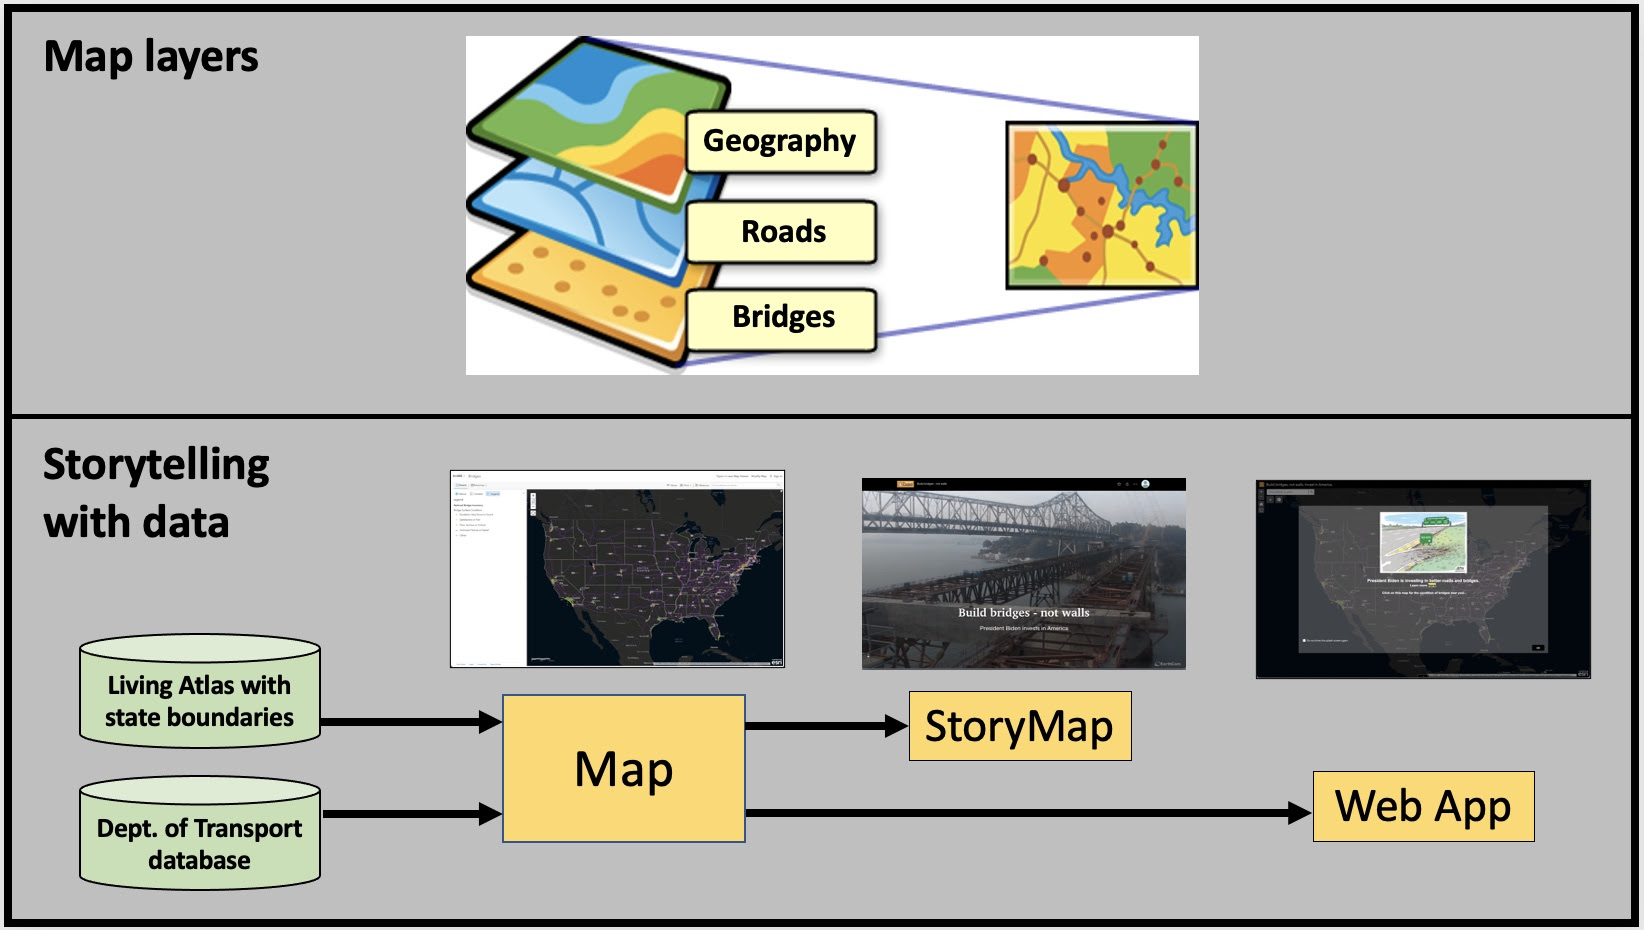 Storytelling with maps and data using ArcGIS Online, StoryMaps and WebApps